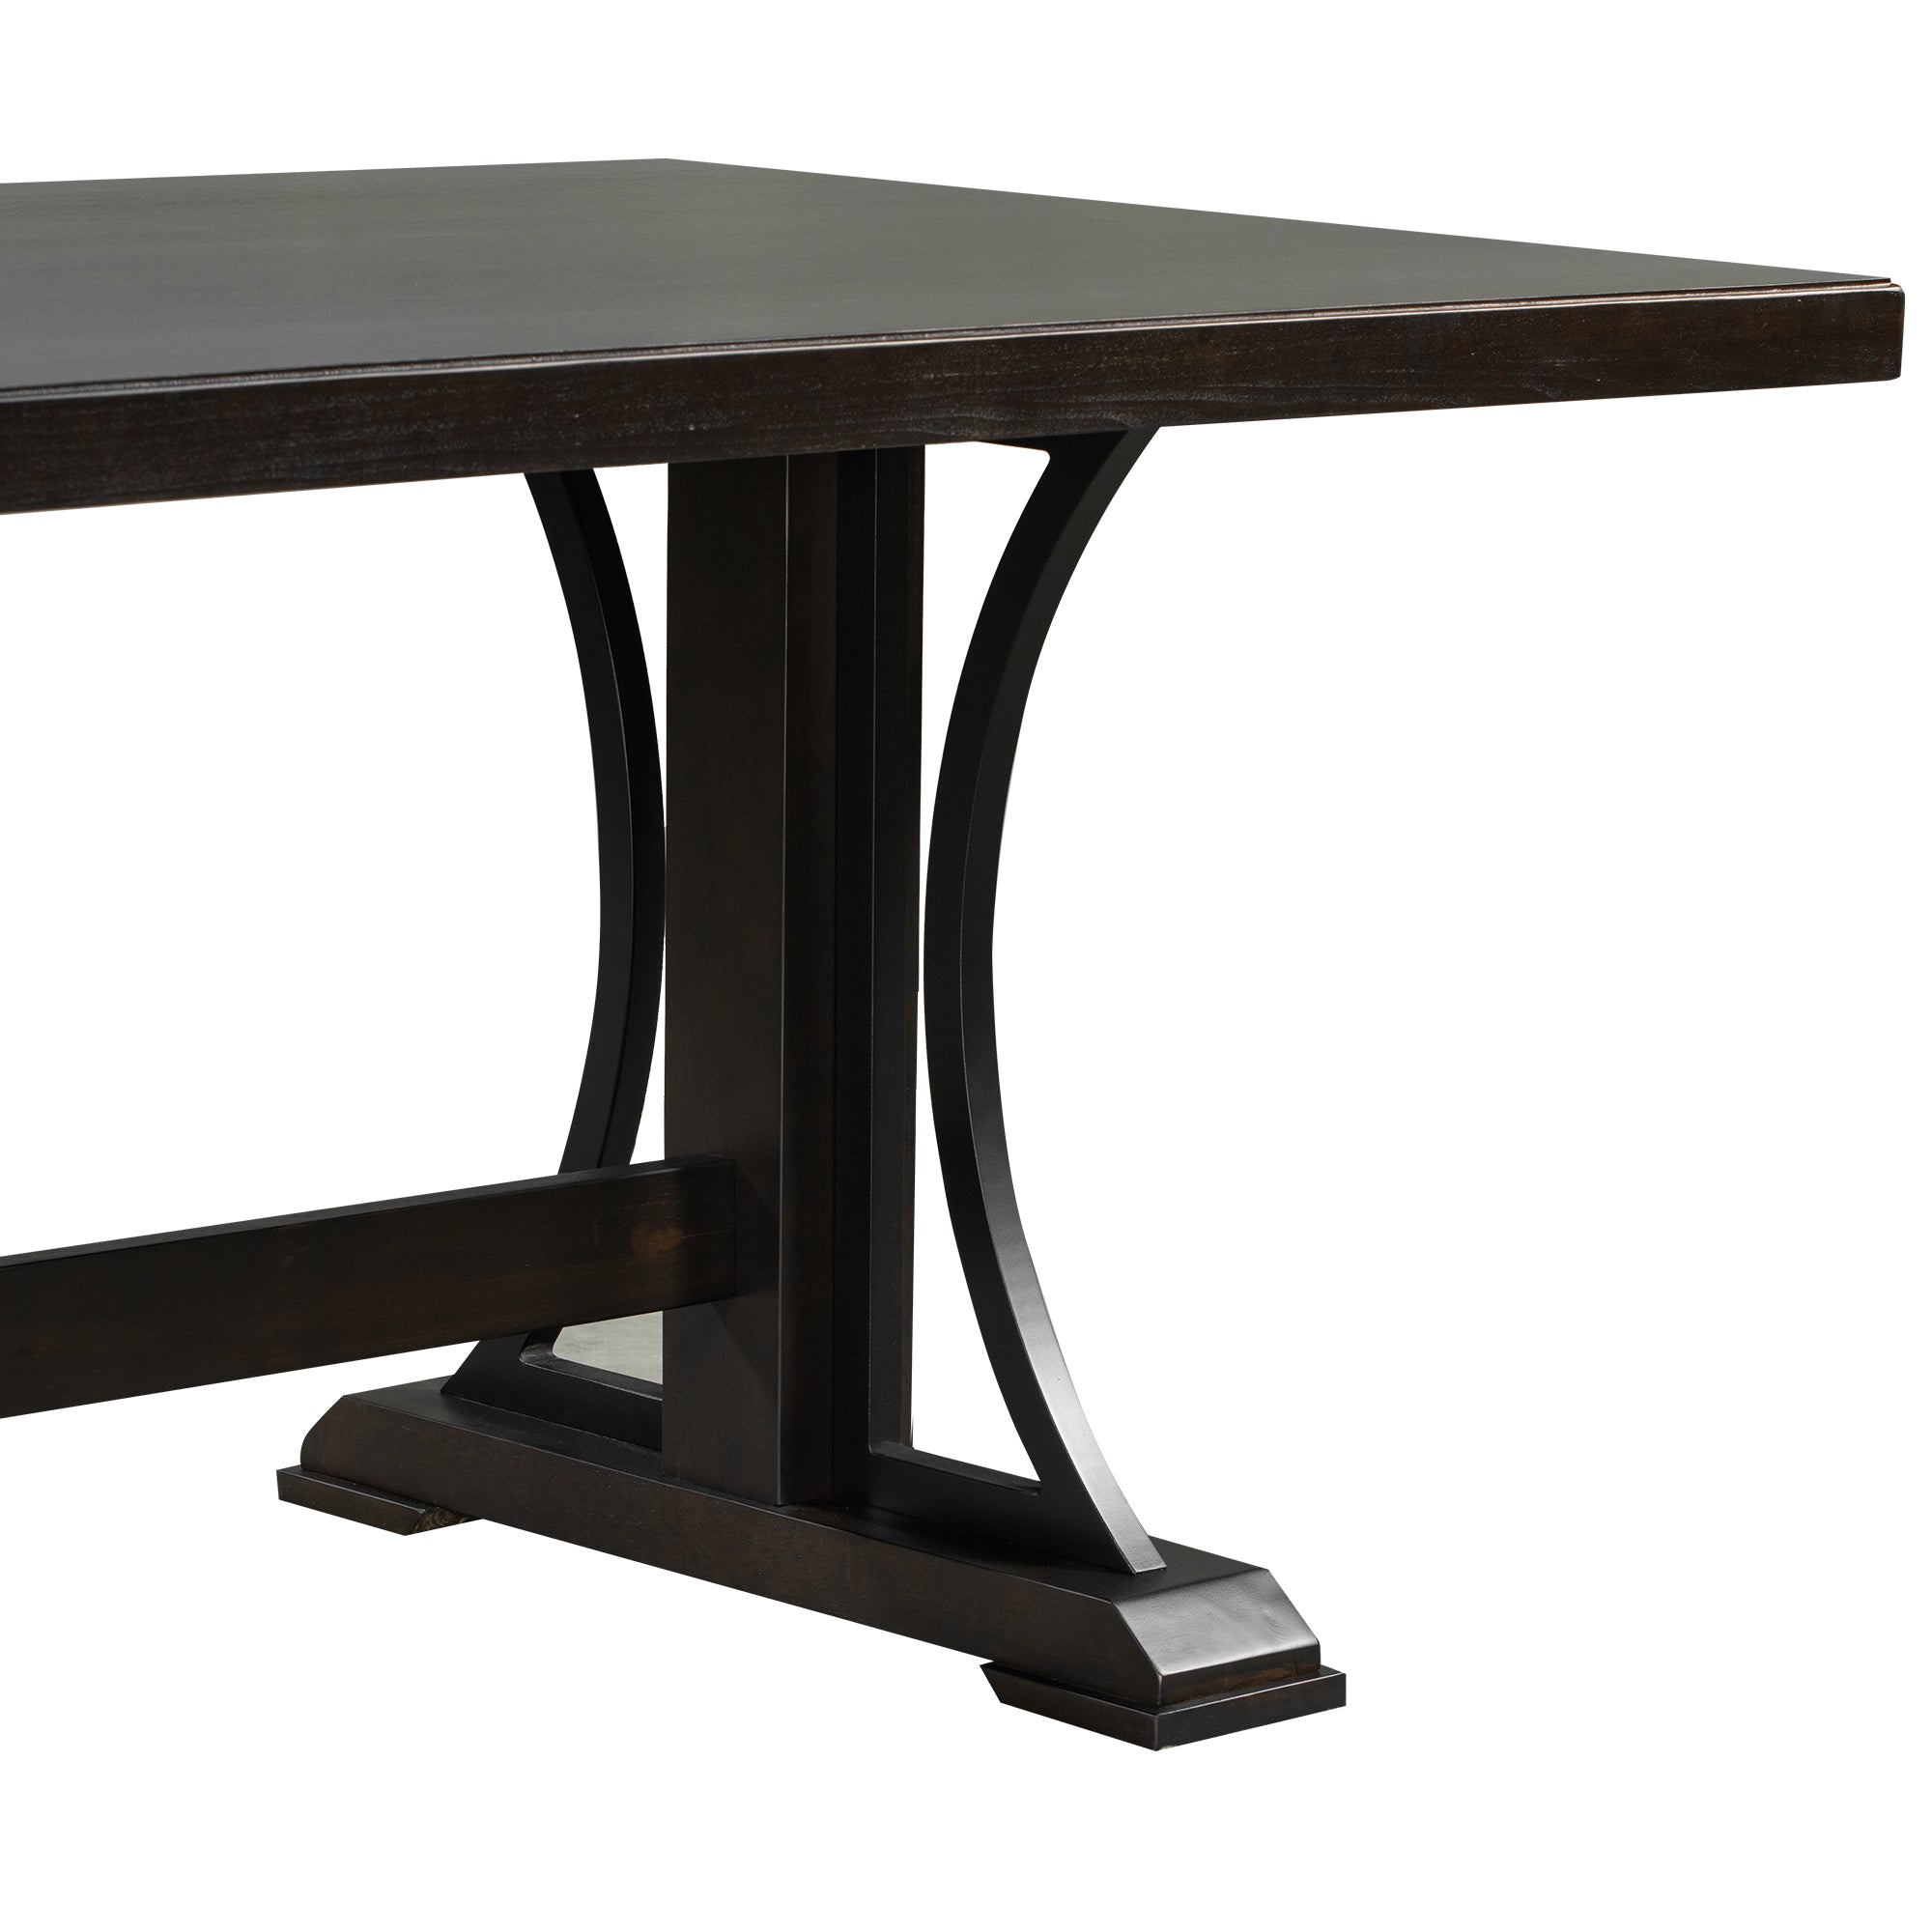 Retro Style Dining Table 78” Wood Rectangular Table, Seats up to 8 - Espresso